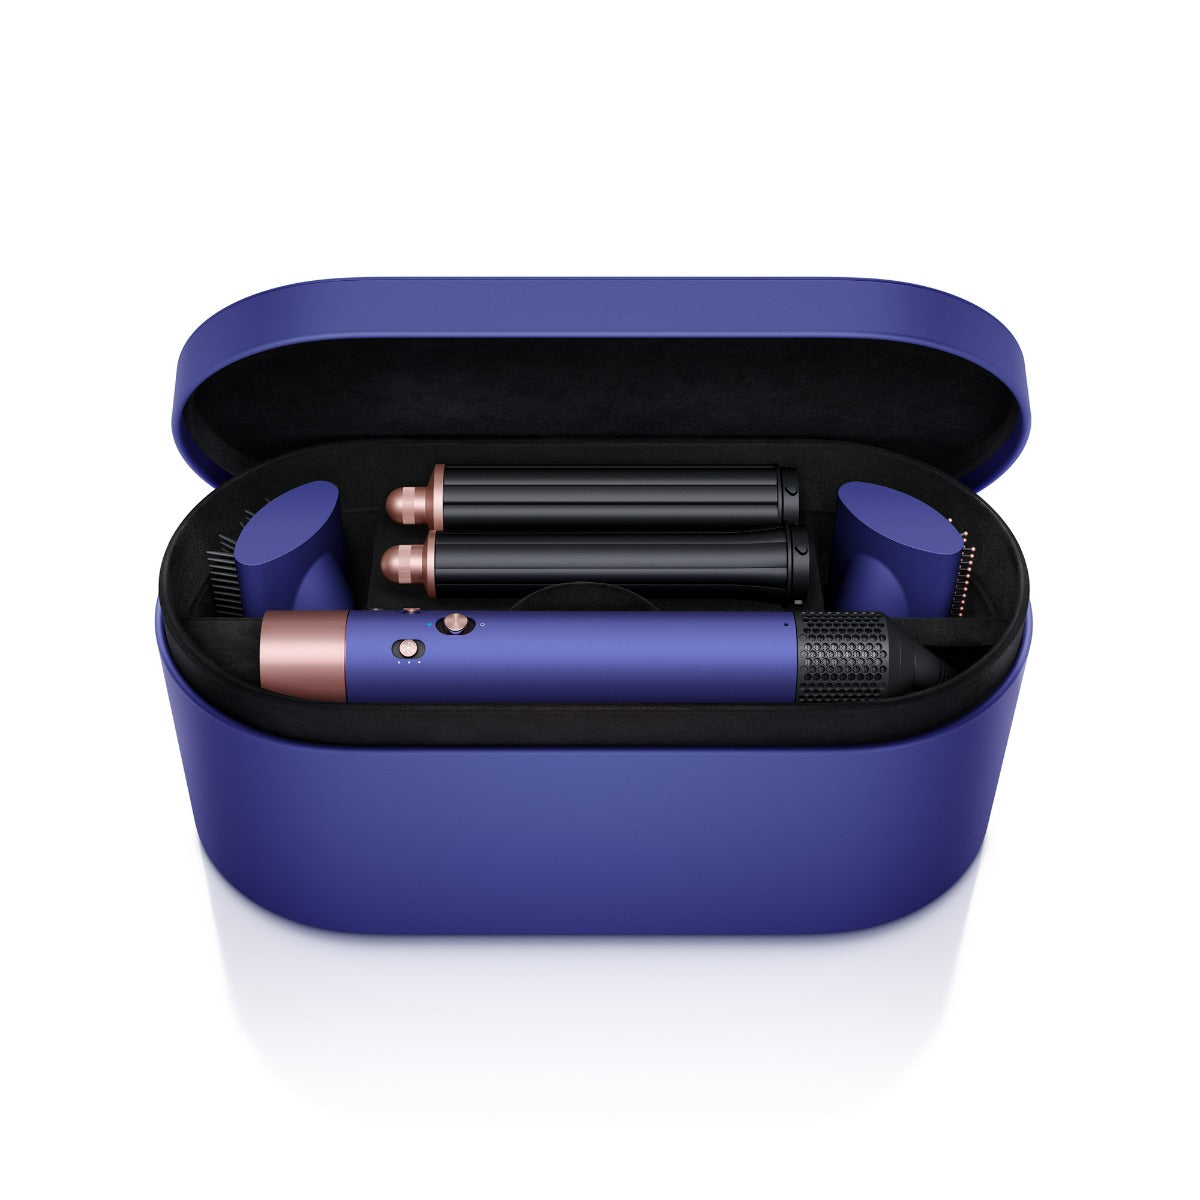 Dyson Airwrap HS05 Multi-Styler Complete Long, 3 Key Controls, 1300W Power, 2.68m Cable Length, Prussian Blue and Rich Copper